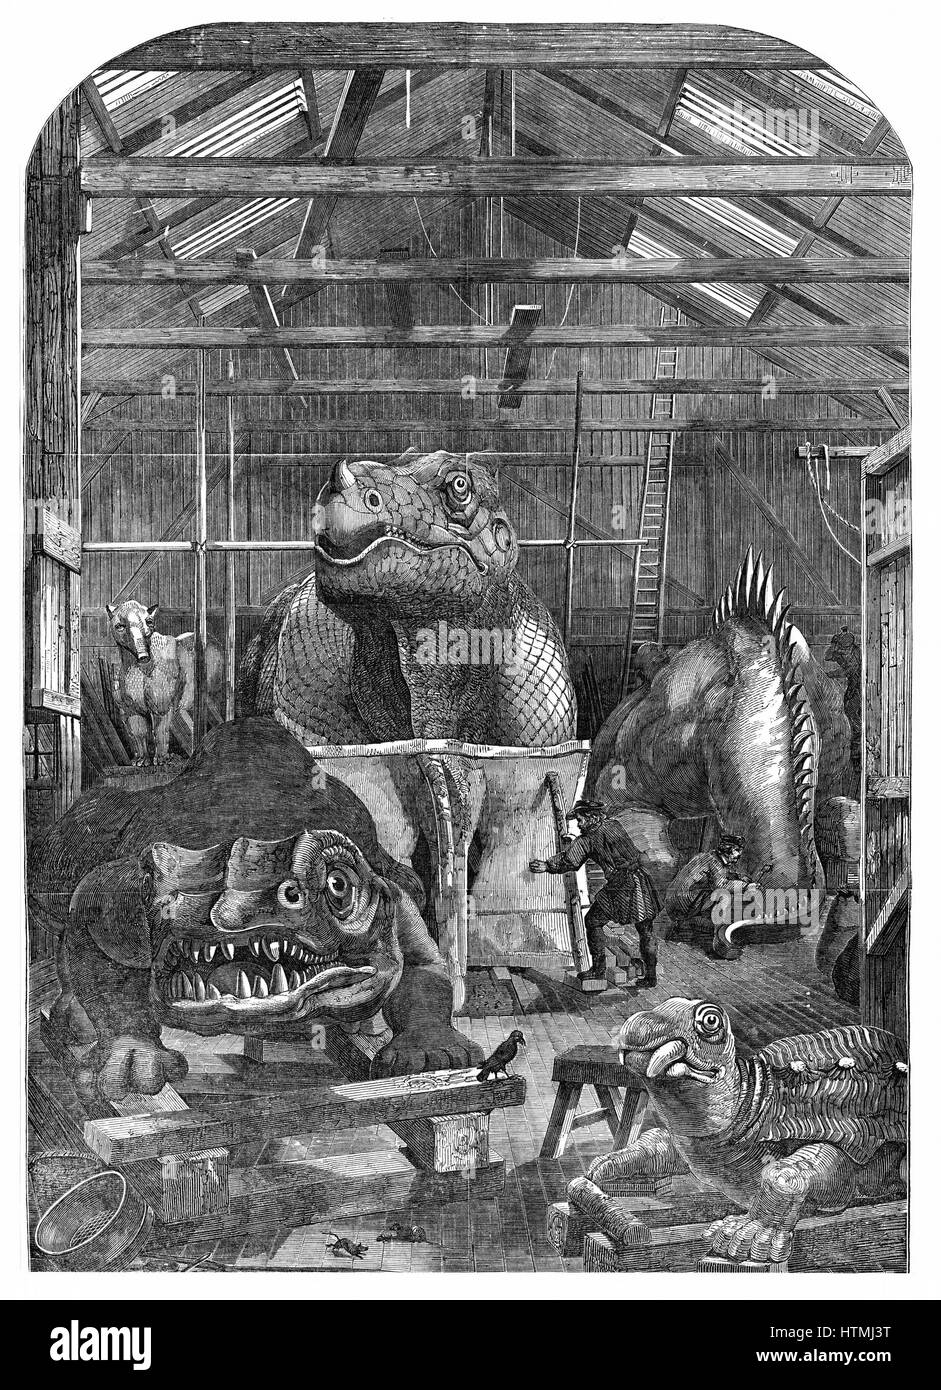 The 'Extinct Animals' model room at Crystal Palace, Sydenham, showing models of dinosaurs being prepared for display. Benjamin Waterhouse Hawkins (1807-89) prepared the display. From 'The Illustrated London News' (London 31 December 1853). Wood engraving Stock Photo